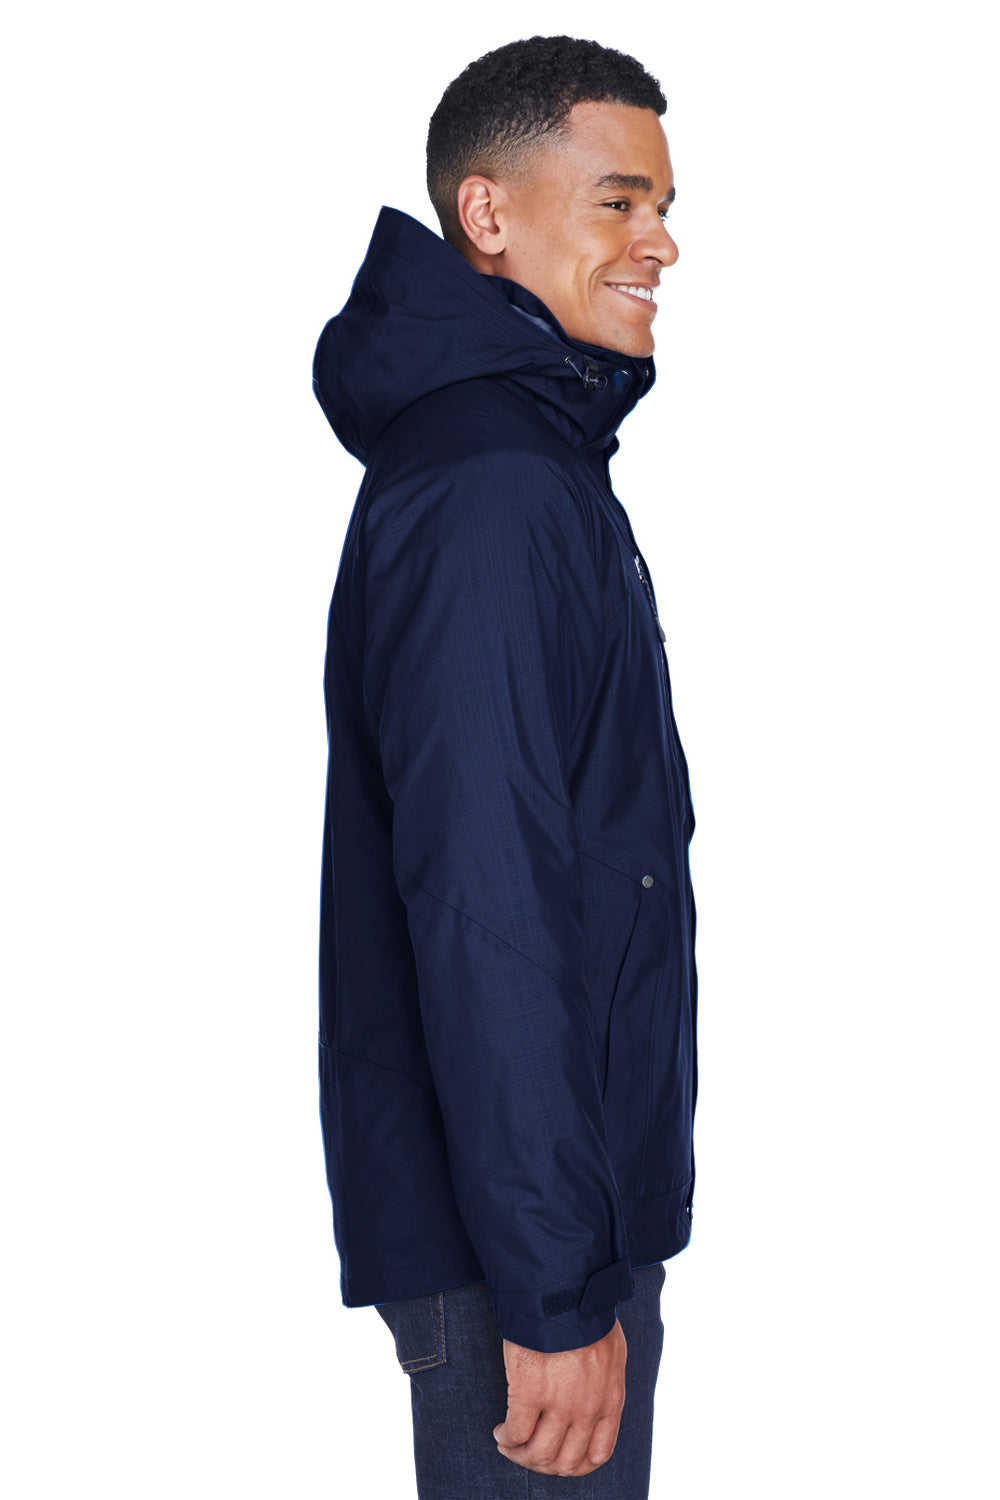 North End 88178 Mens Caprice 3-in-1 Full Zip Hooded Jacket Navy Blue Side